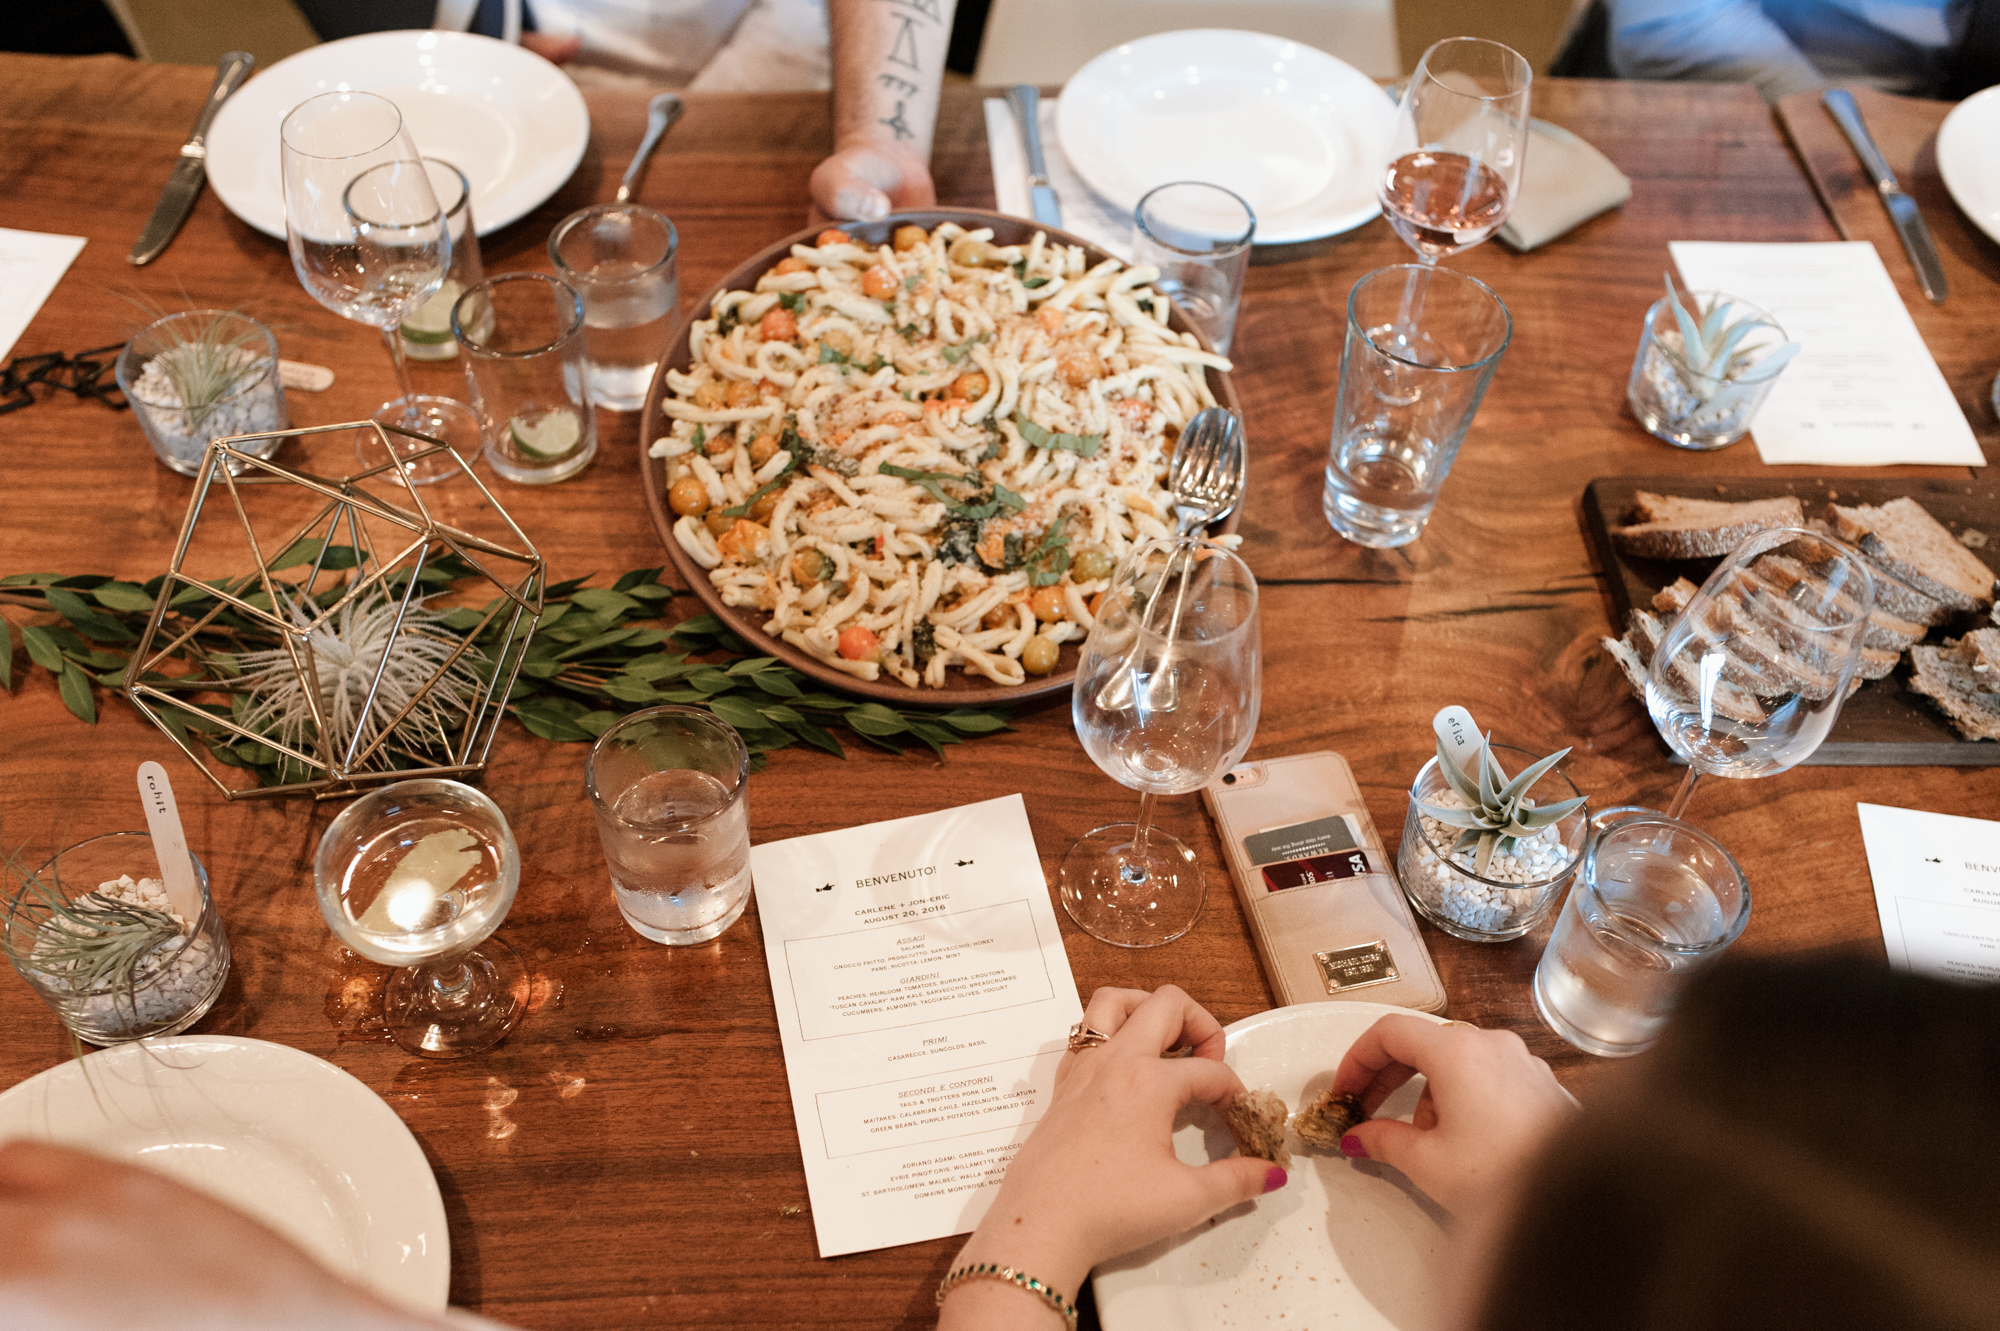 Wedding reception dinner is served at Roman Candle Baking Co. by wedding photographer Briana Morrison